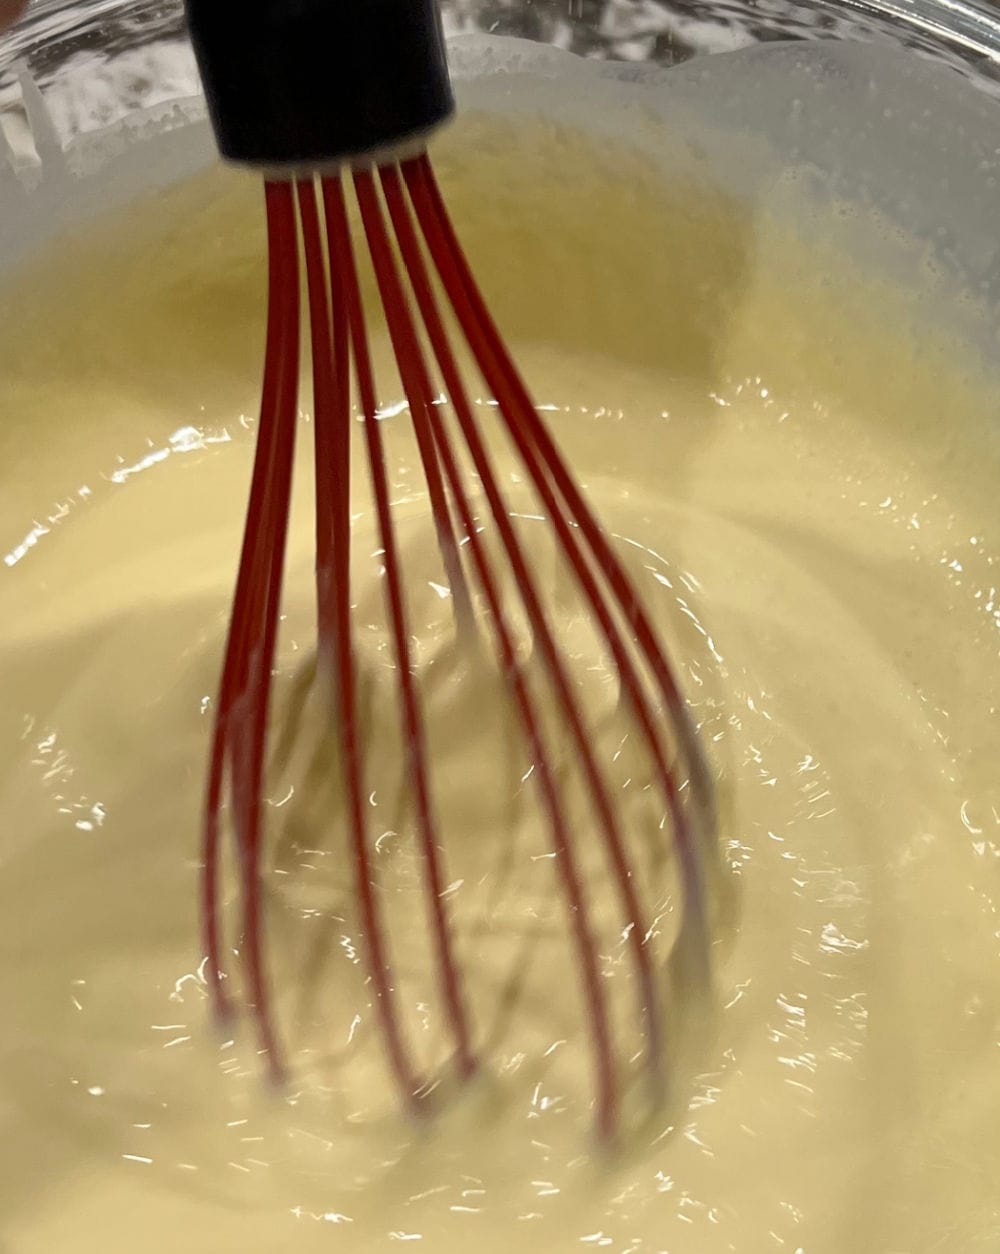 whisk eggs and heavy cream.